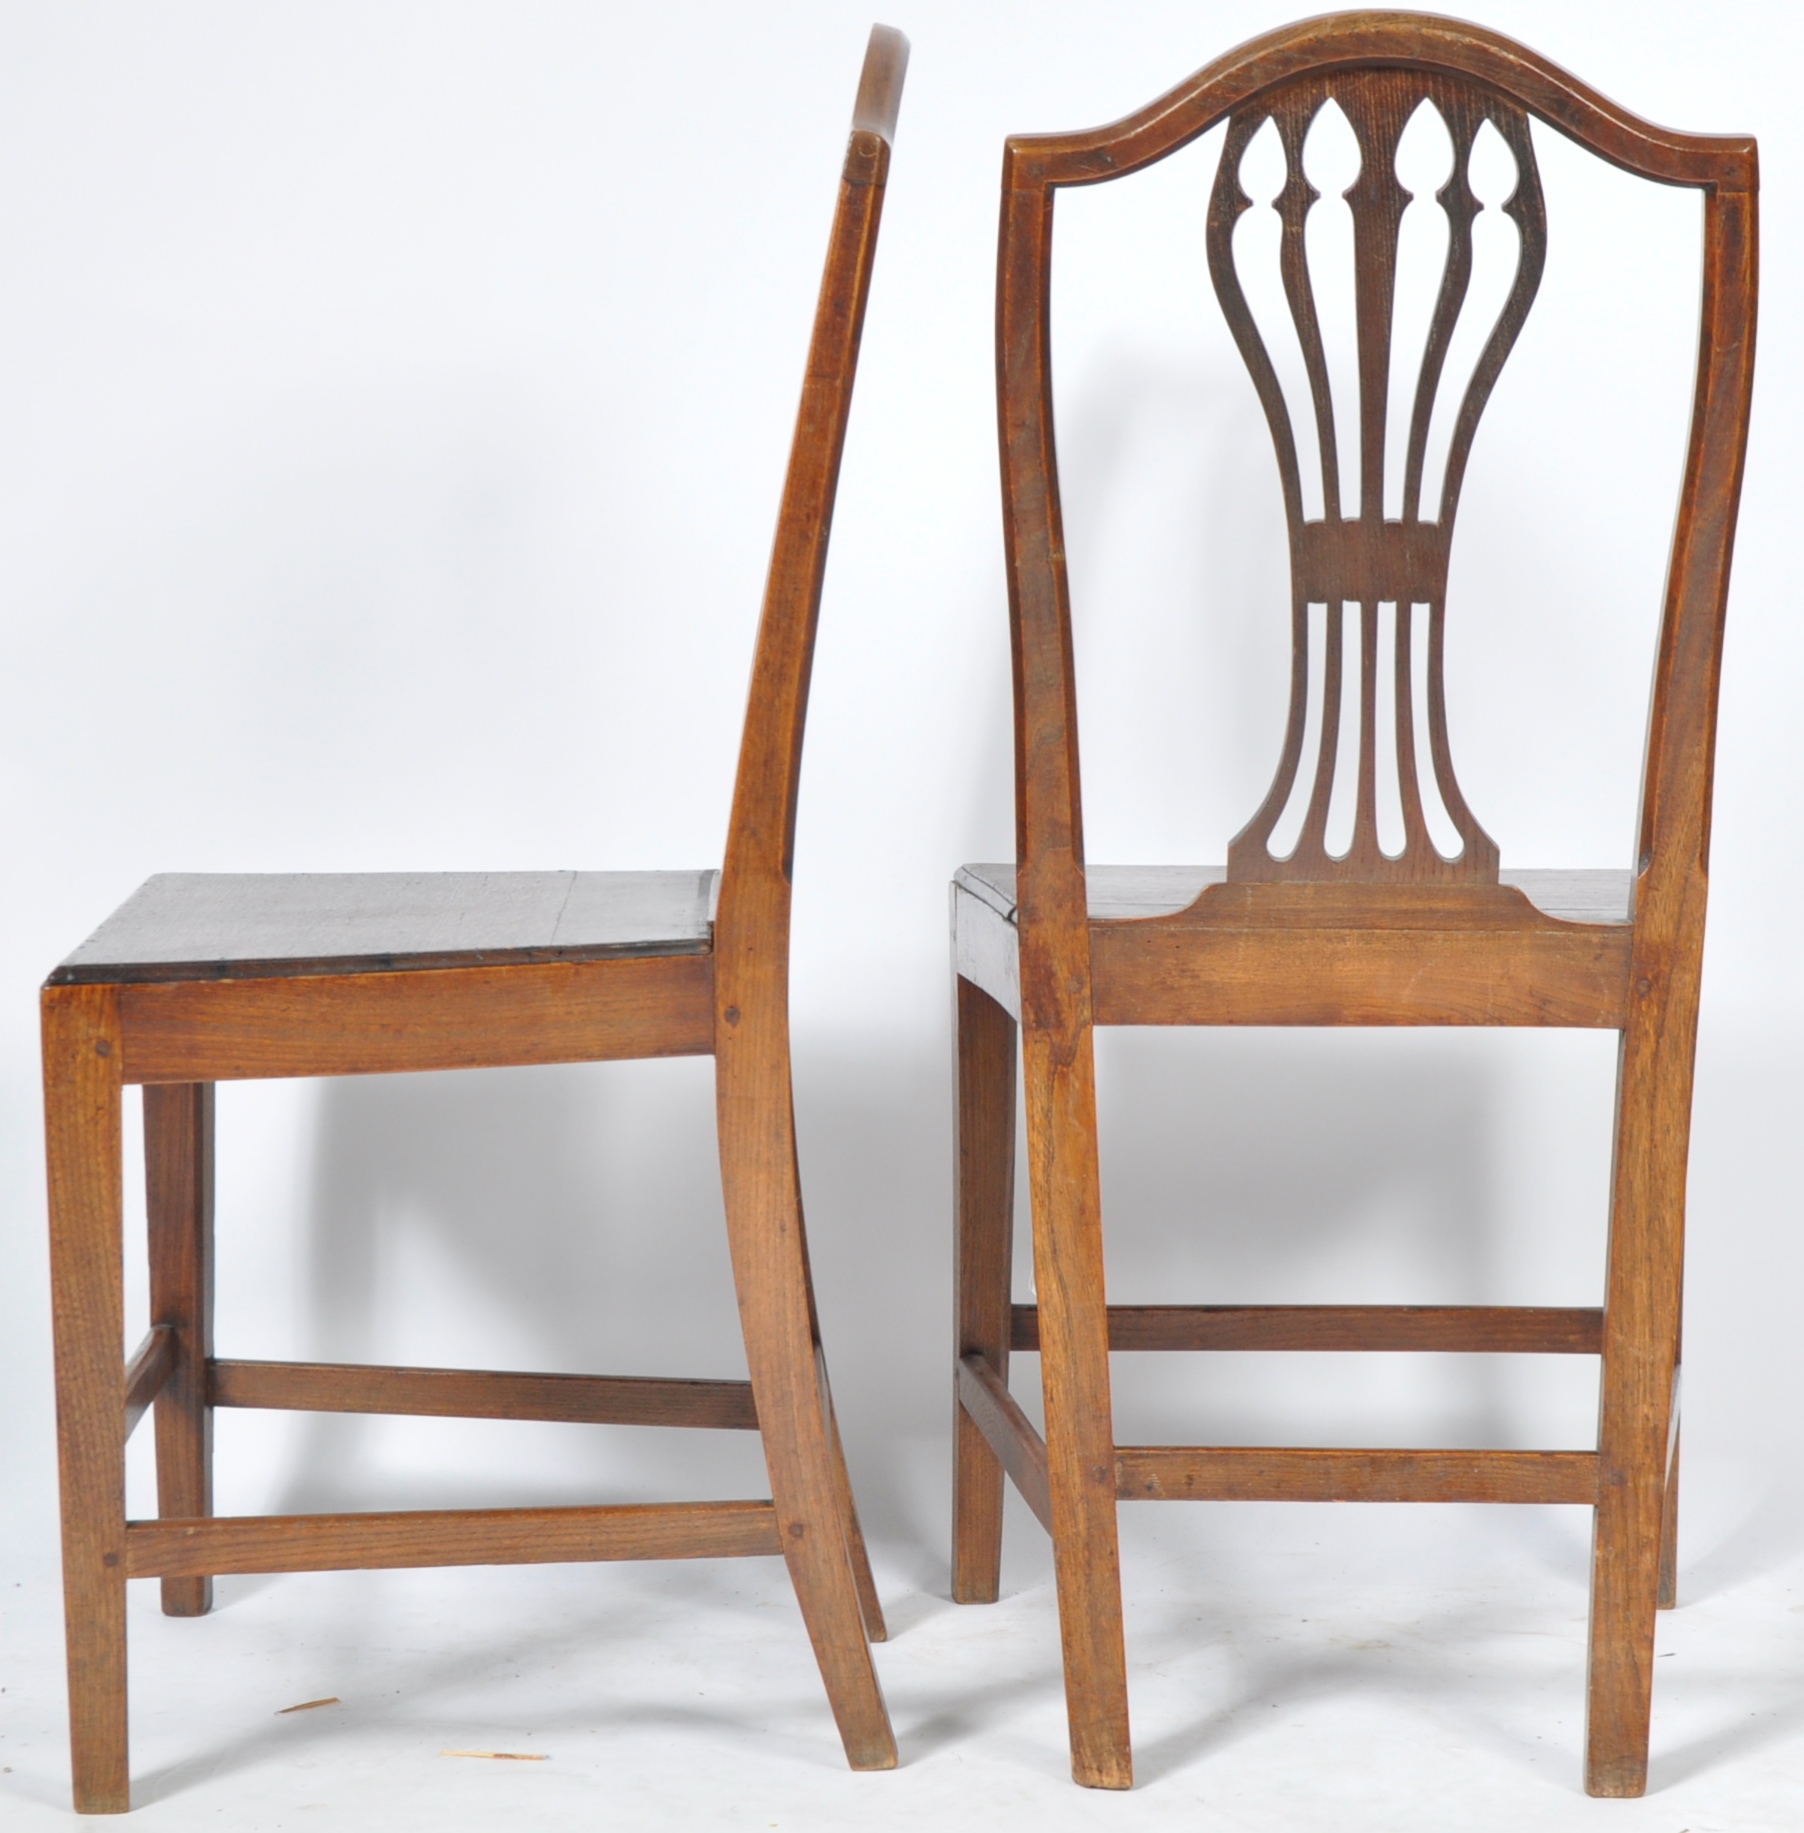 SET OF SIX 18TH CENTURY CHIPPENDALE STYLE OAK & ELM DINING CHAIRS - Image 11 of 11